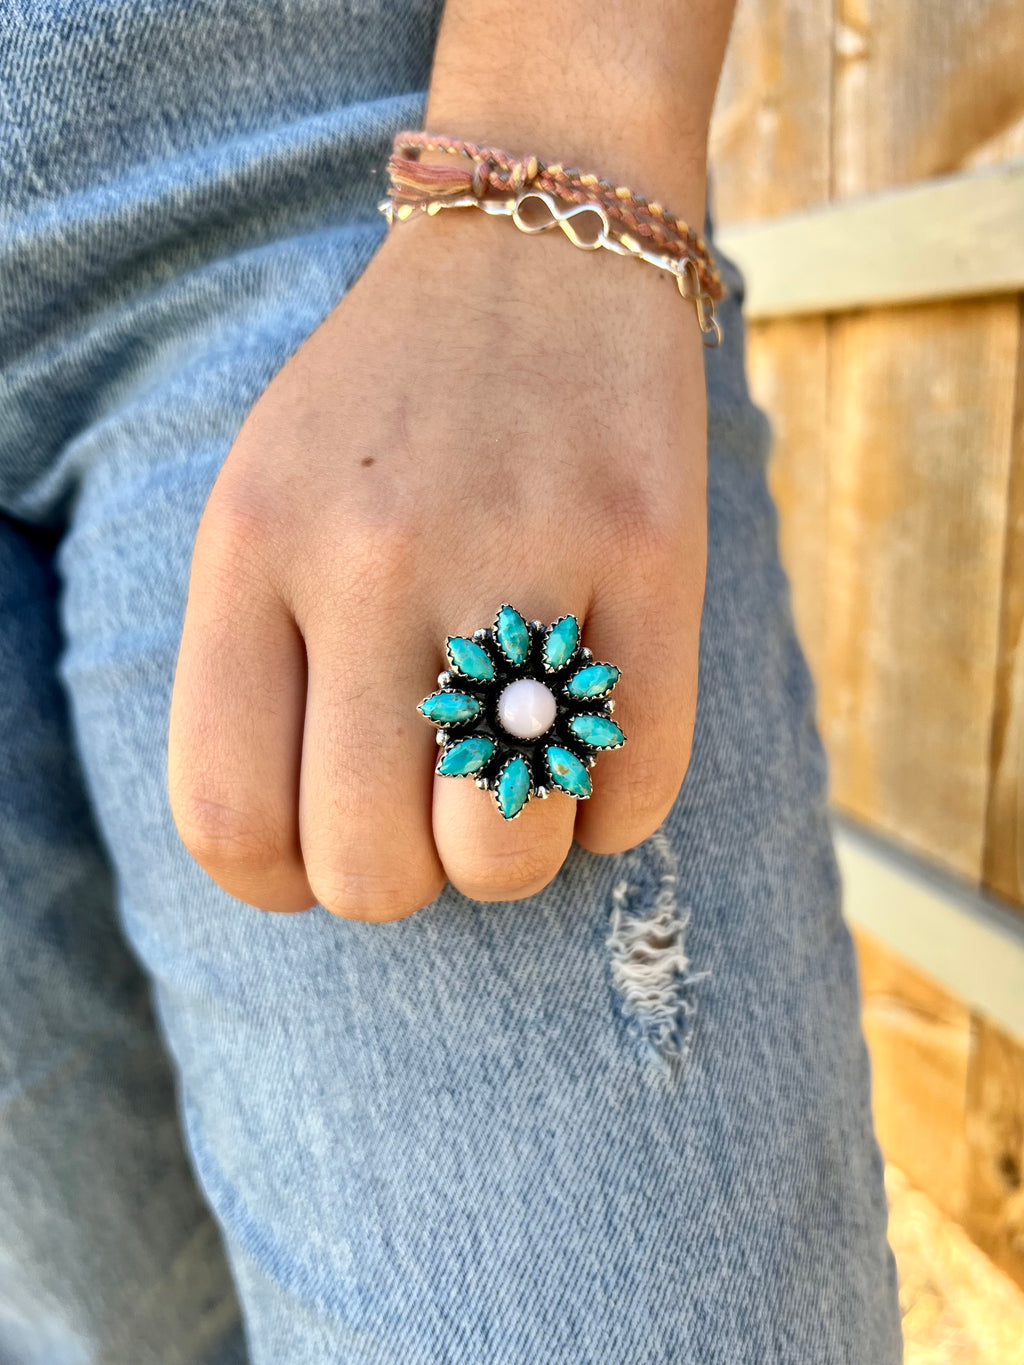 This exquisite ring is the perfect combination of style and craftsmanship. Crafted by Indian artisans, it's made of genuine Sterling Silver with 9 Kingsman Turquoise stones in a beautiful flower design, and features a delicate pink opal center stone. Timelessly elegant and adjustable, this ring lets you express your unique beauty.  Suggested Retail: $250.00